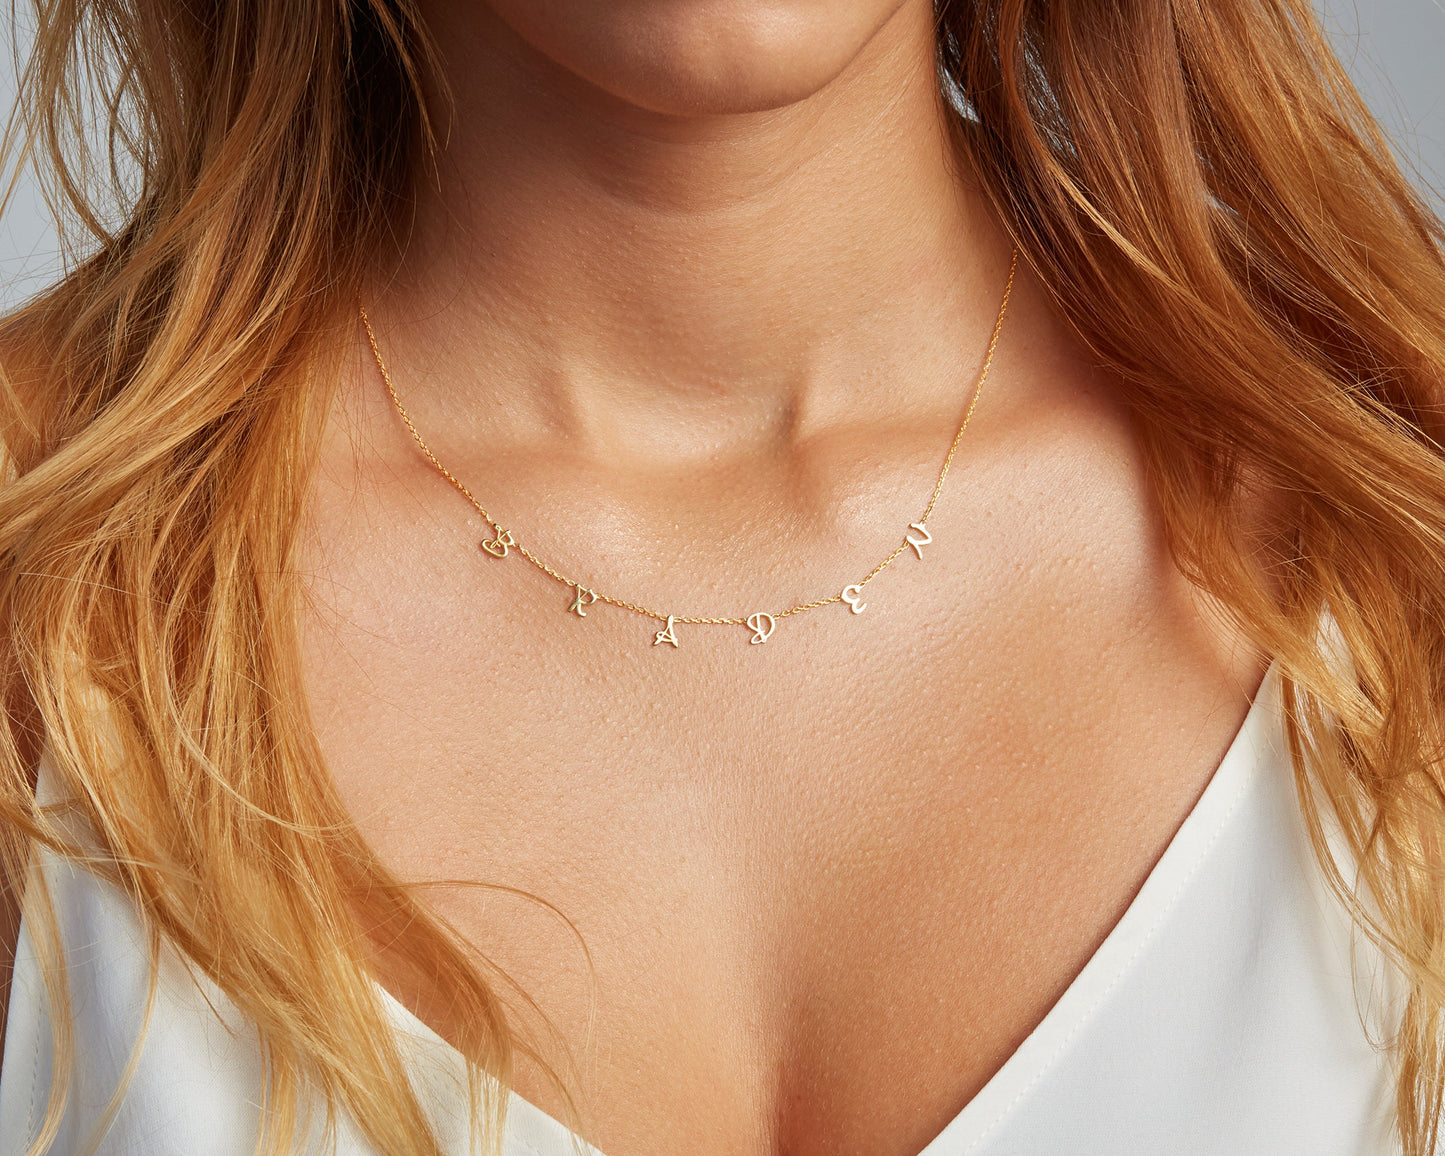 14K GOLD NAME NECKLACE, Personalized Necklace, Minimalist Necklace with Name, Initial Necklaces, Necklace for Women, Christmas Gifts